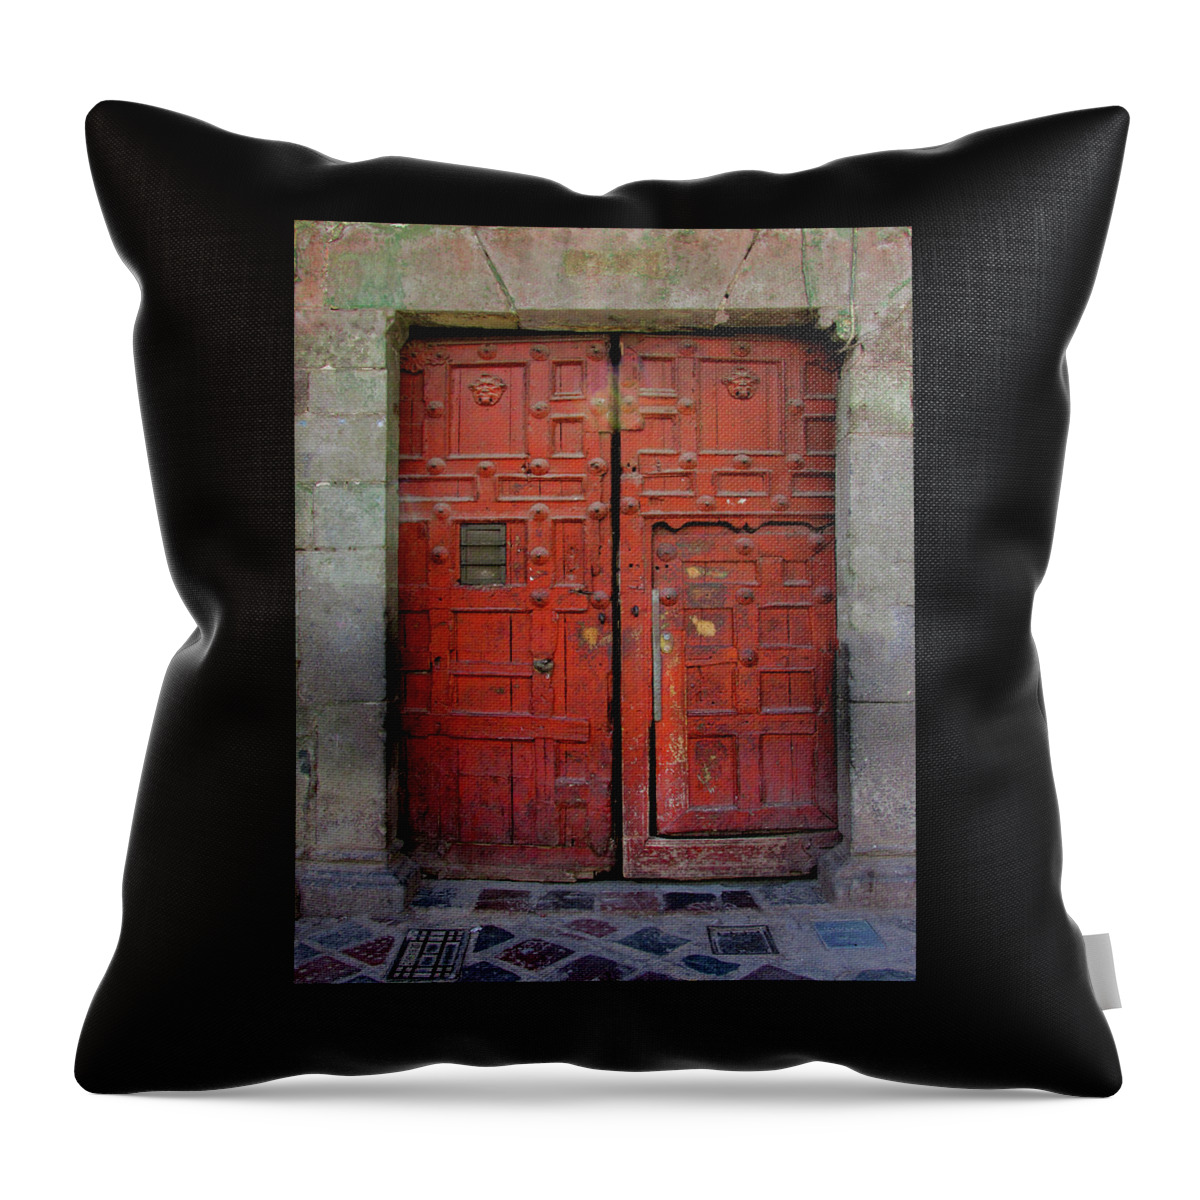 Cusco Double Red Doors Throw Pillow featuring the photograph Cusco Double Red Doors by Kandy Hurley